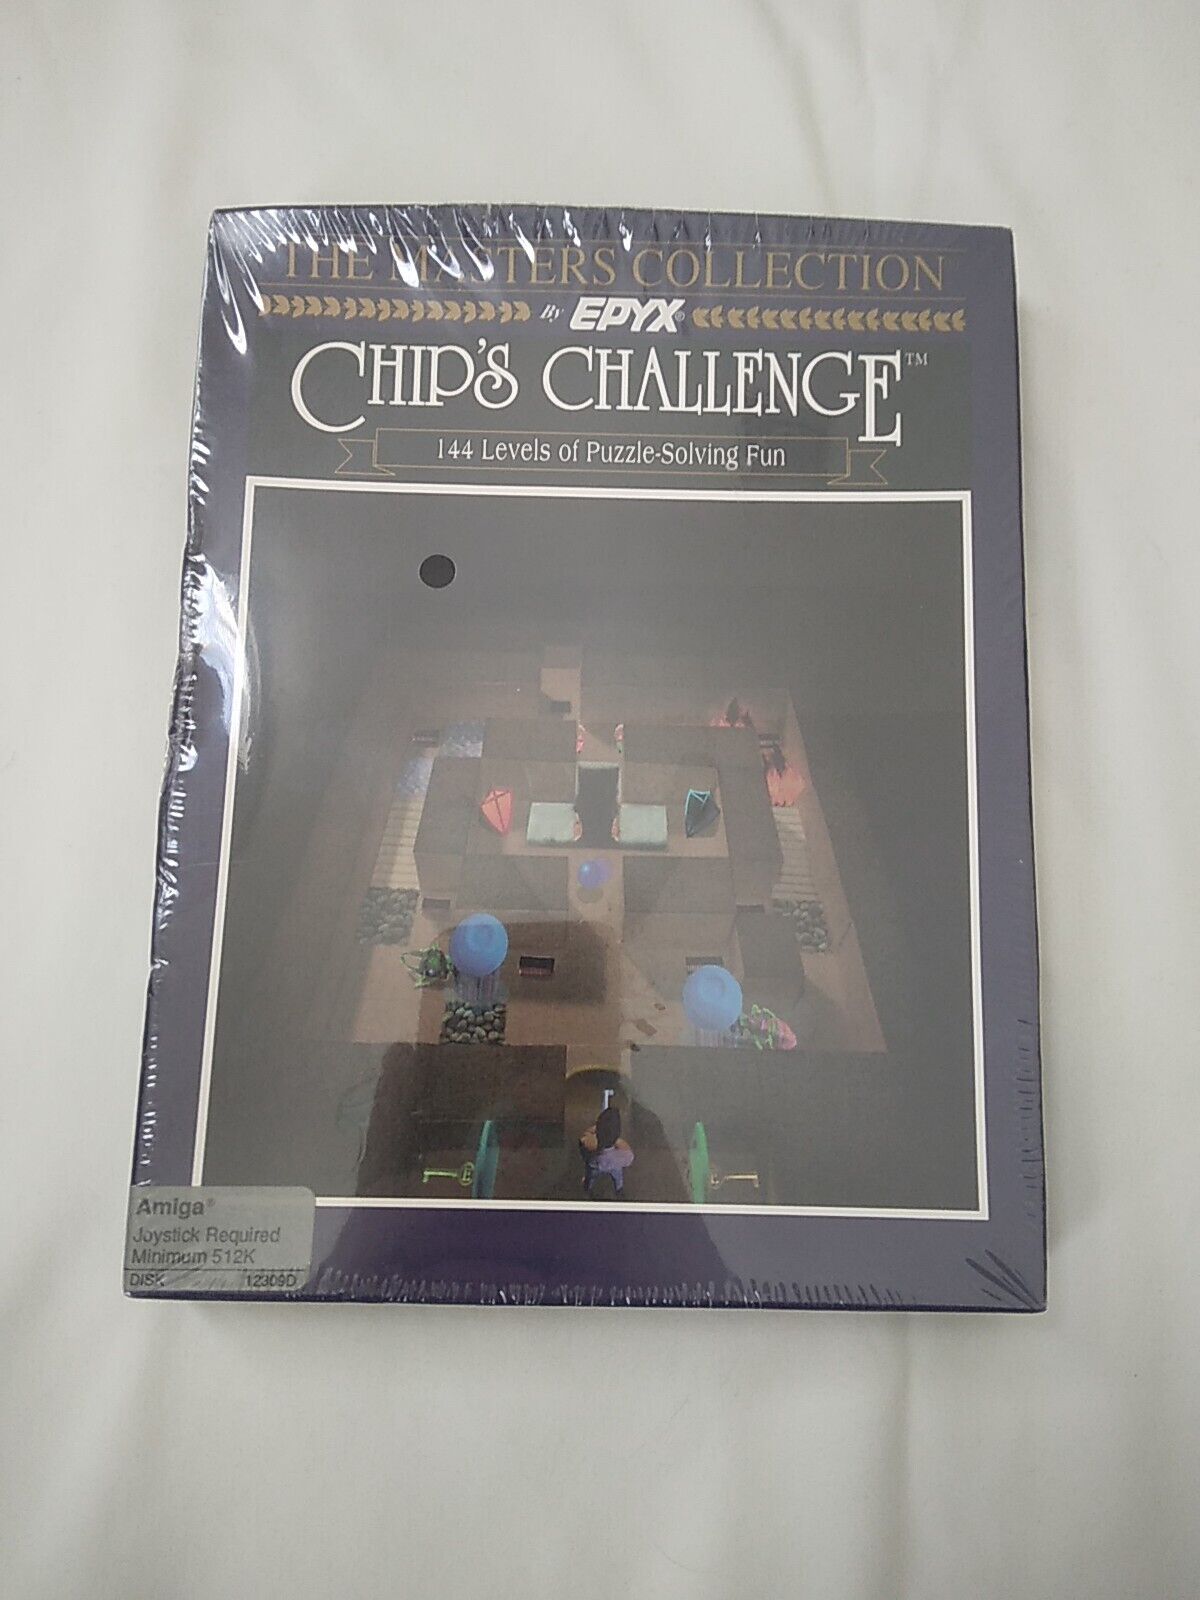 NIB Chip\'s Challenge Commodore Amiga Epyx The Masters Collection Sealed